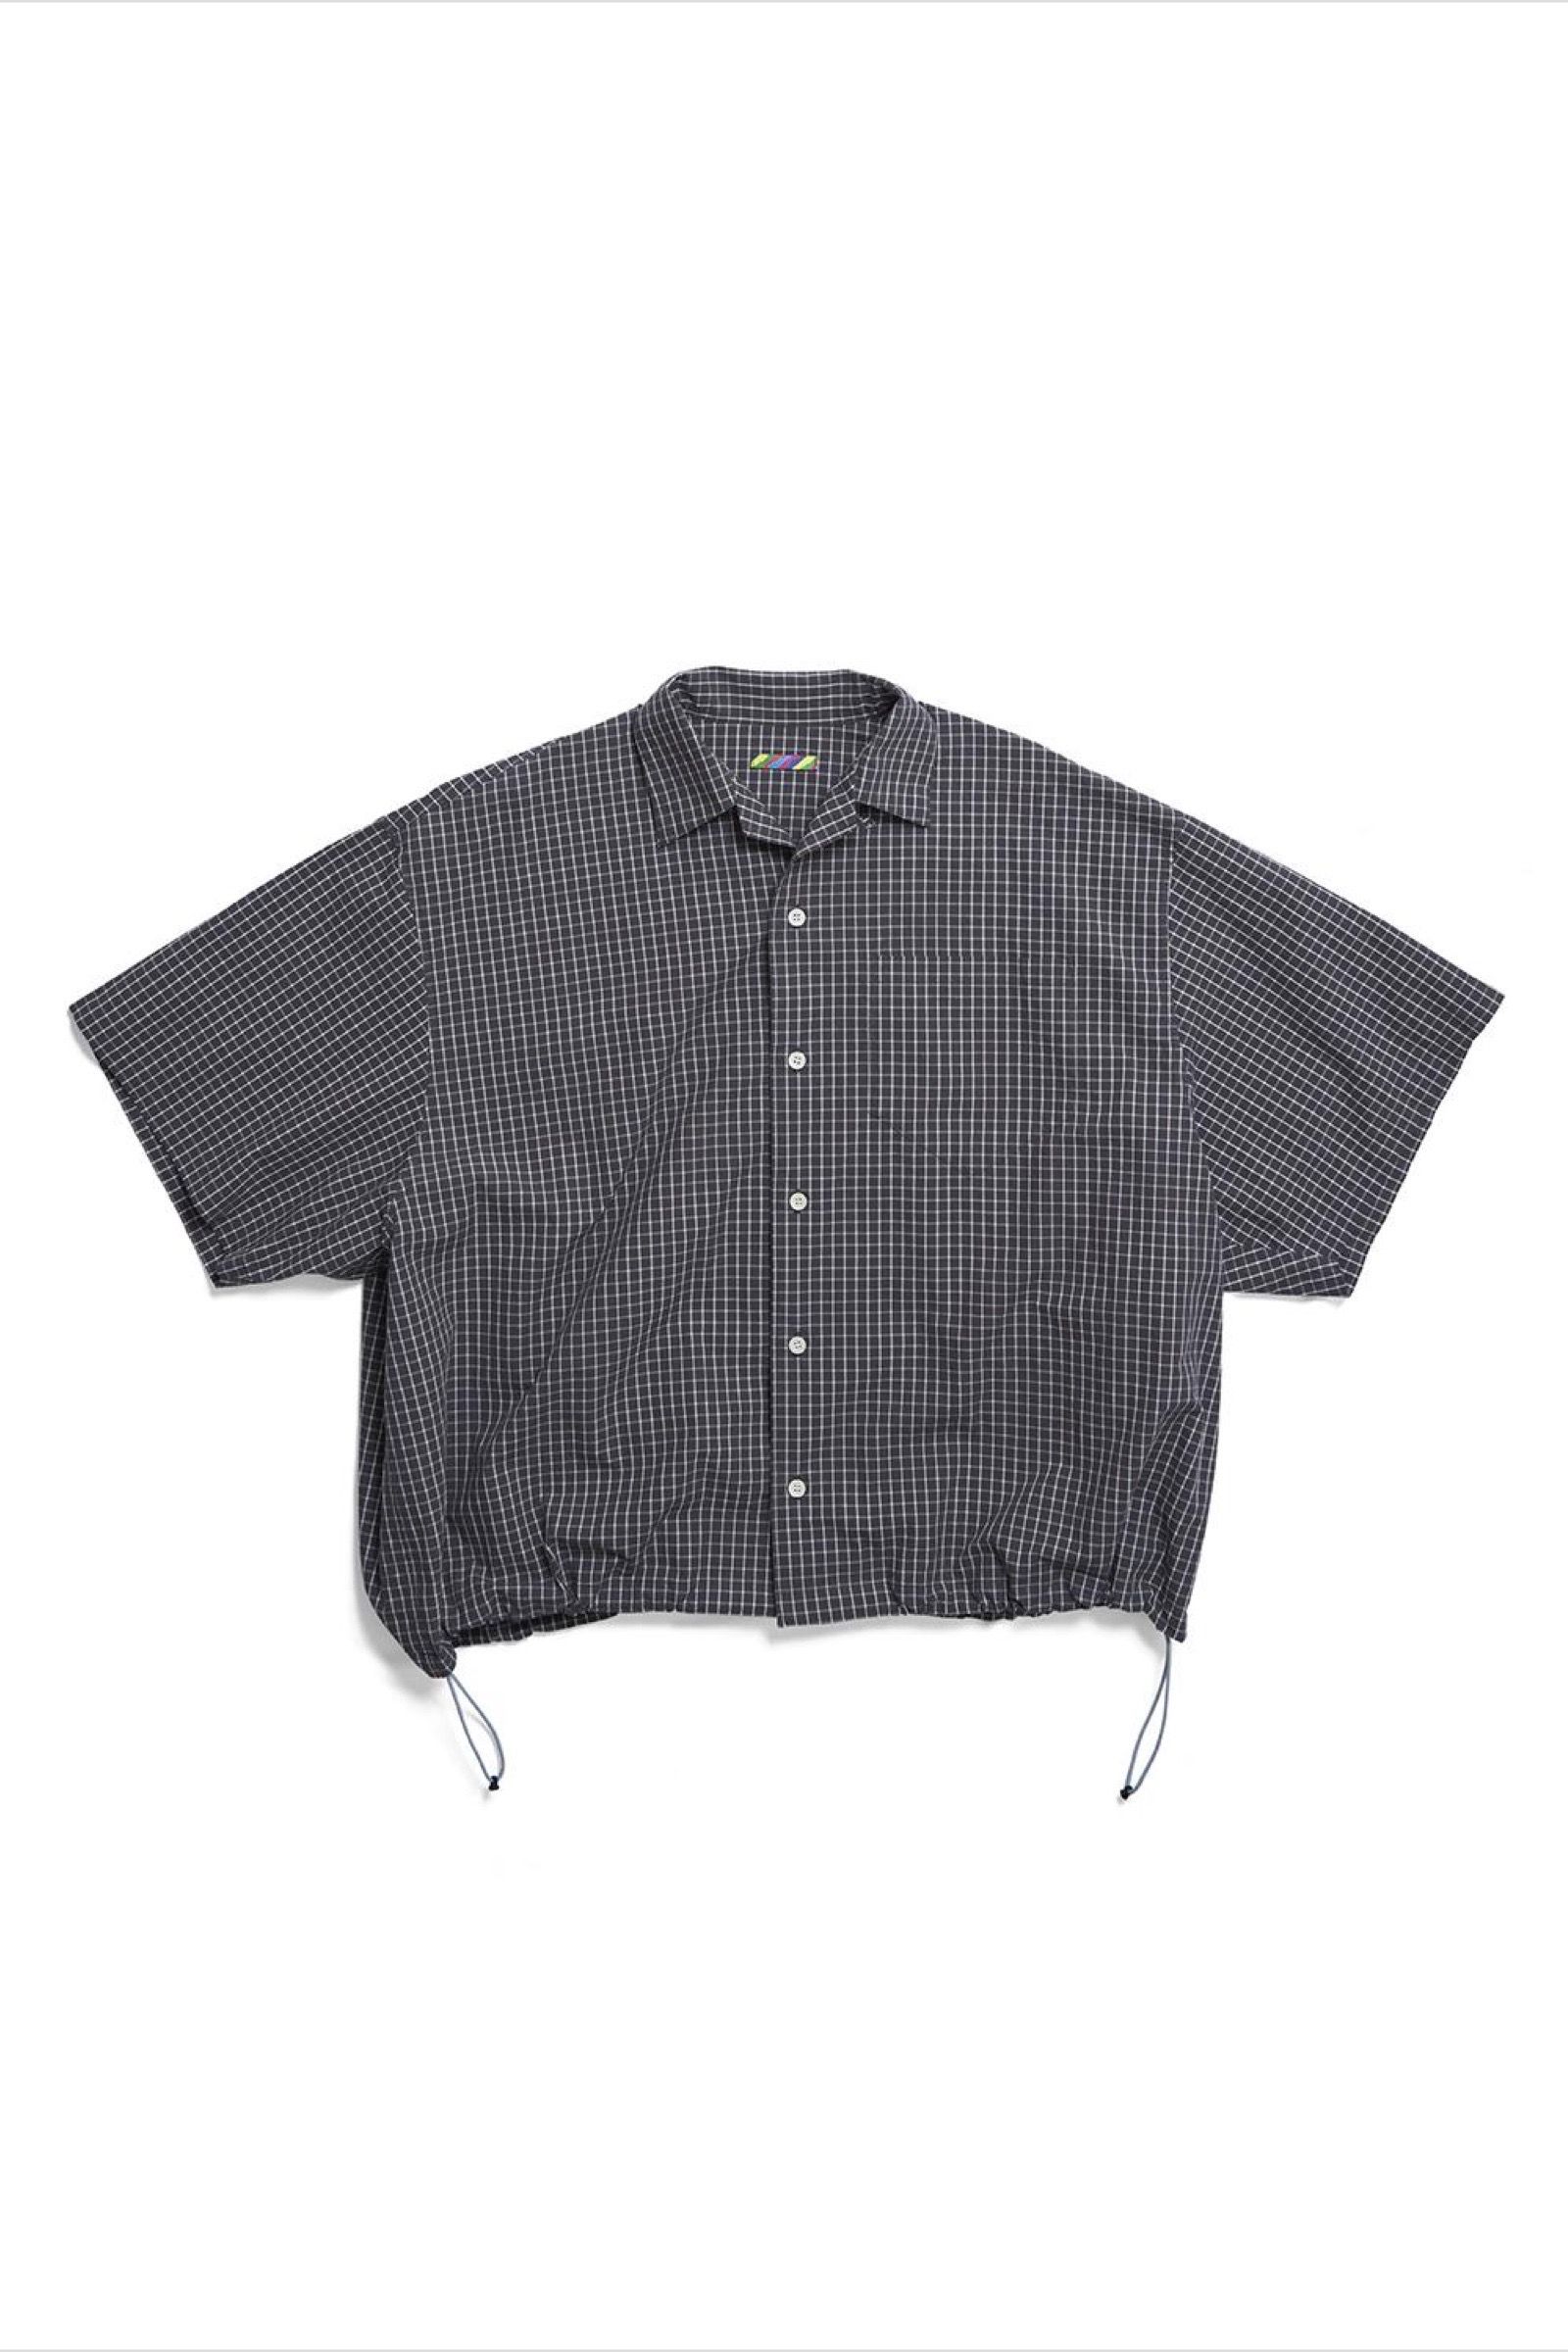 is-ness - balloon wide shirts -grey check- 22ss | asterisk